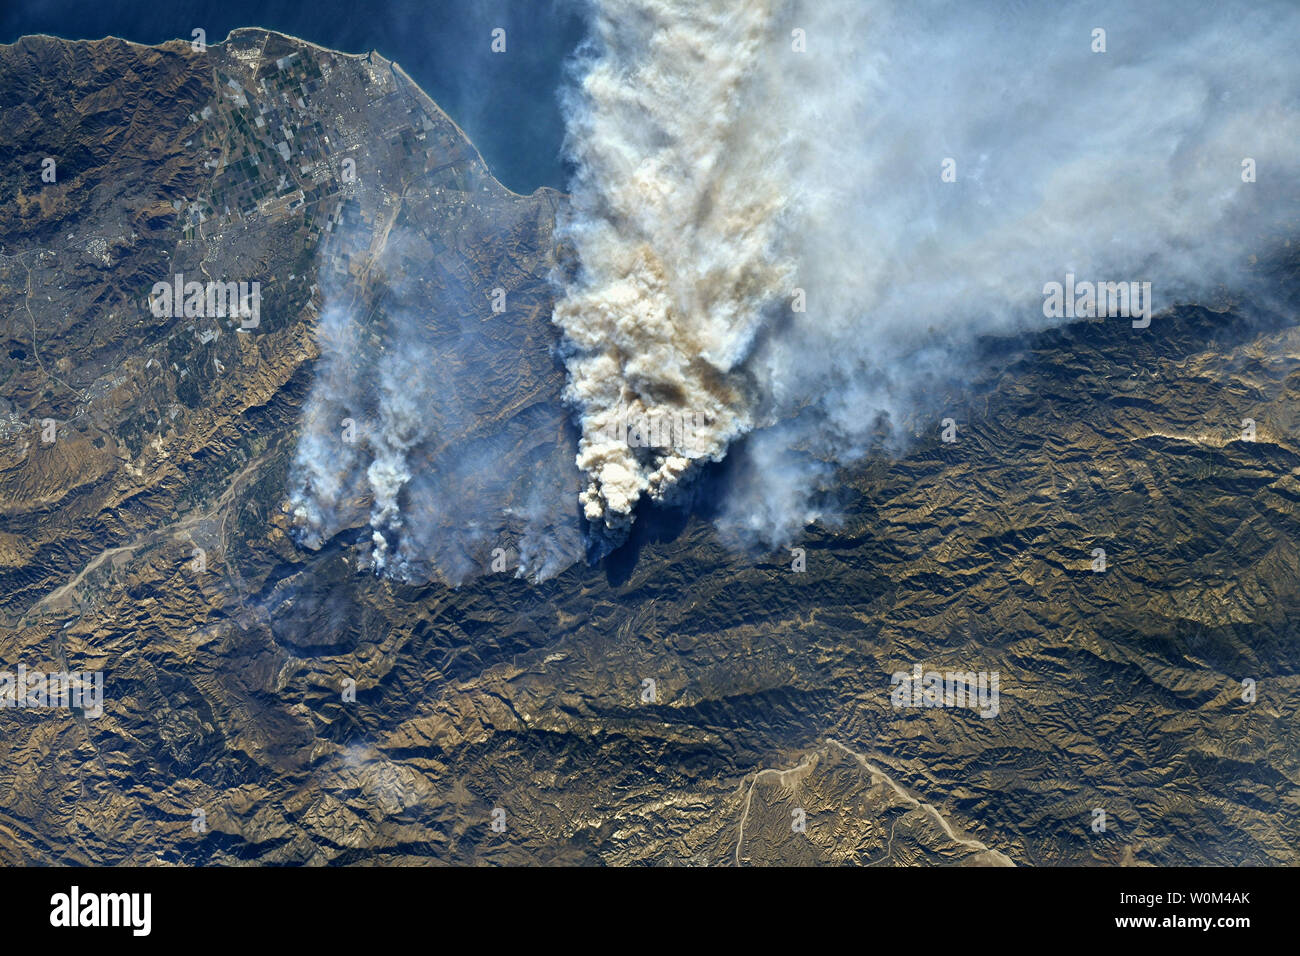 The wildfires in Southern California were photographed by NASA astronaut Randy Bresnik from the International Space Station during a flyover of the region on December 7, 2017. Watching the plumes of smoke from space, Bresnik observed, 'Today's pass over SoCal, unfortunately, doesn't look any better. The fires east of Camp Pendleton and in Baja are visible as well.' This raging inferno that has been described by firefighters as a 'war zone' started just three days ago on December 4. Burning more than 96,000 acres and 150 structures to date according to Inciweb this fire has been urged on by one Stock Photo